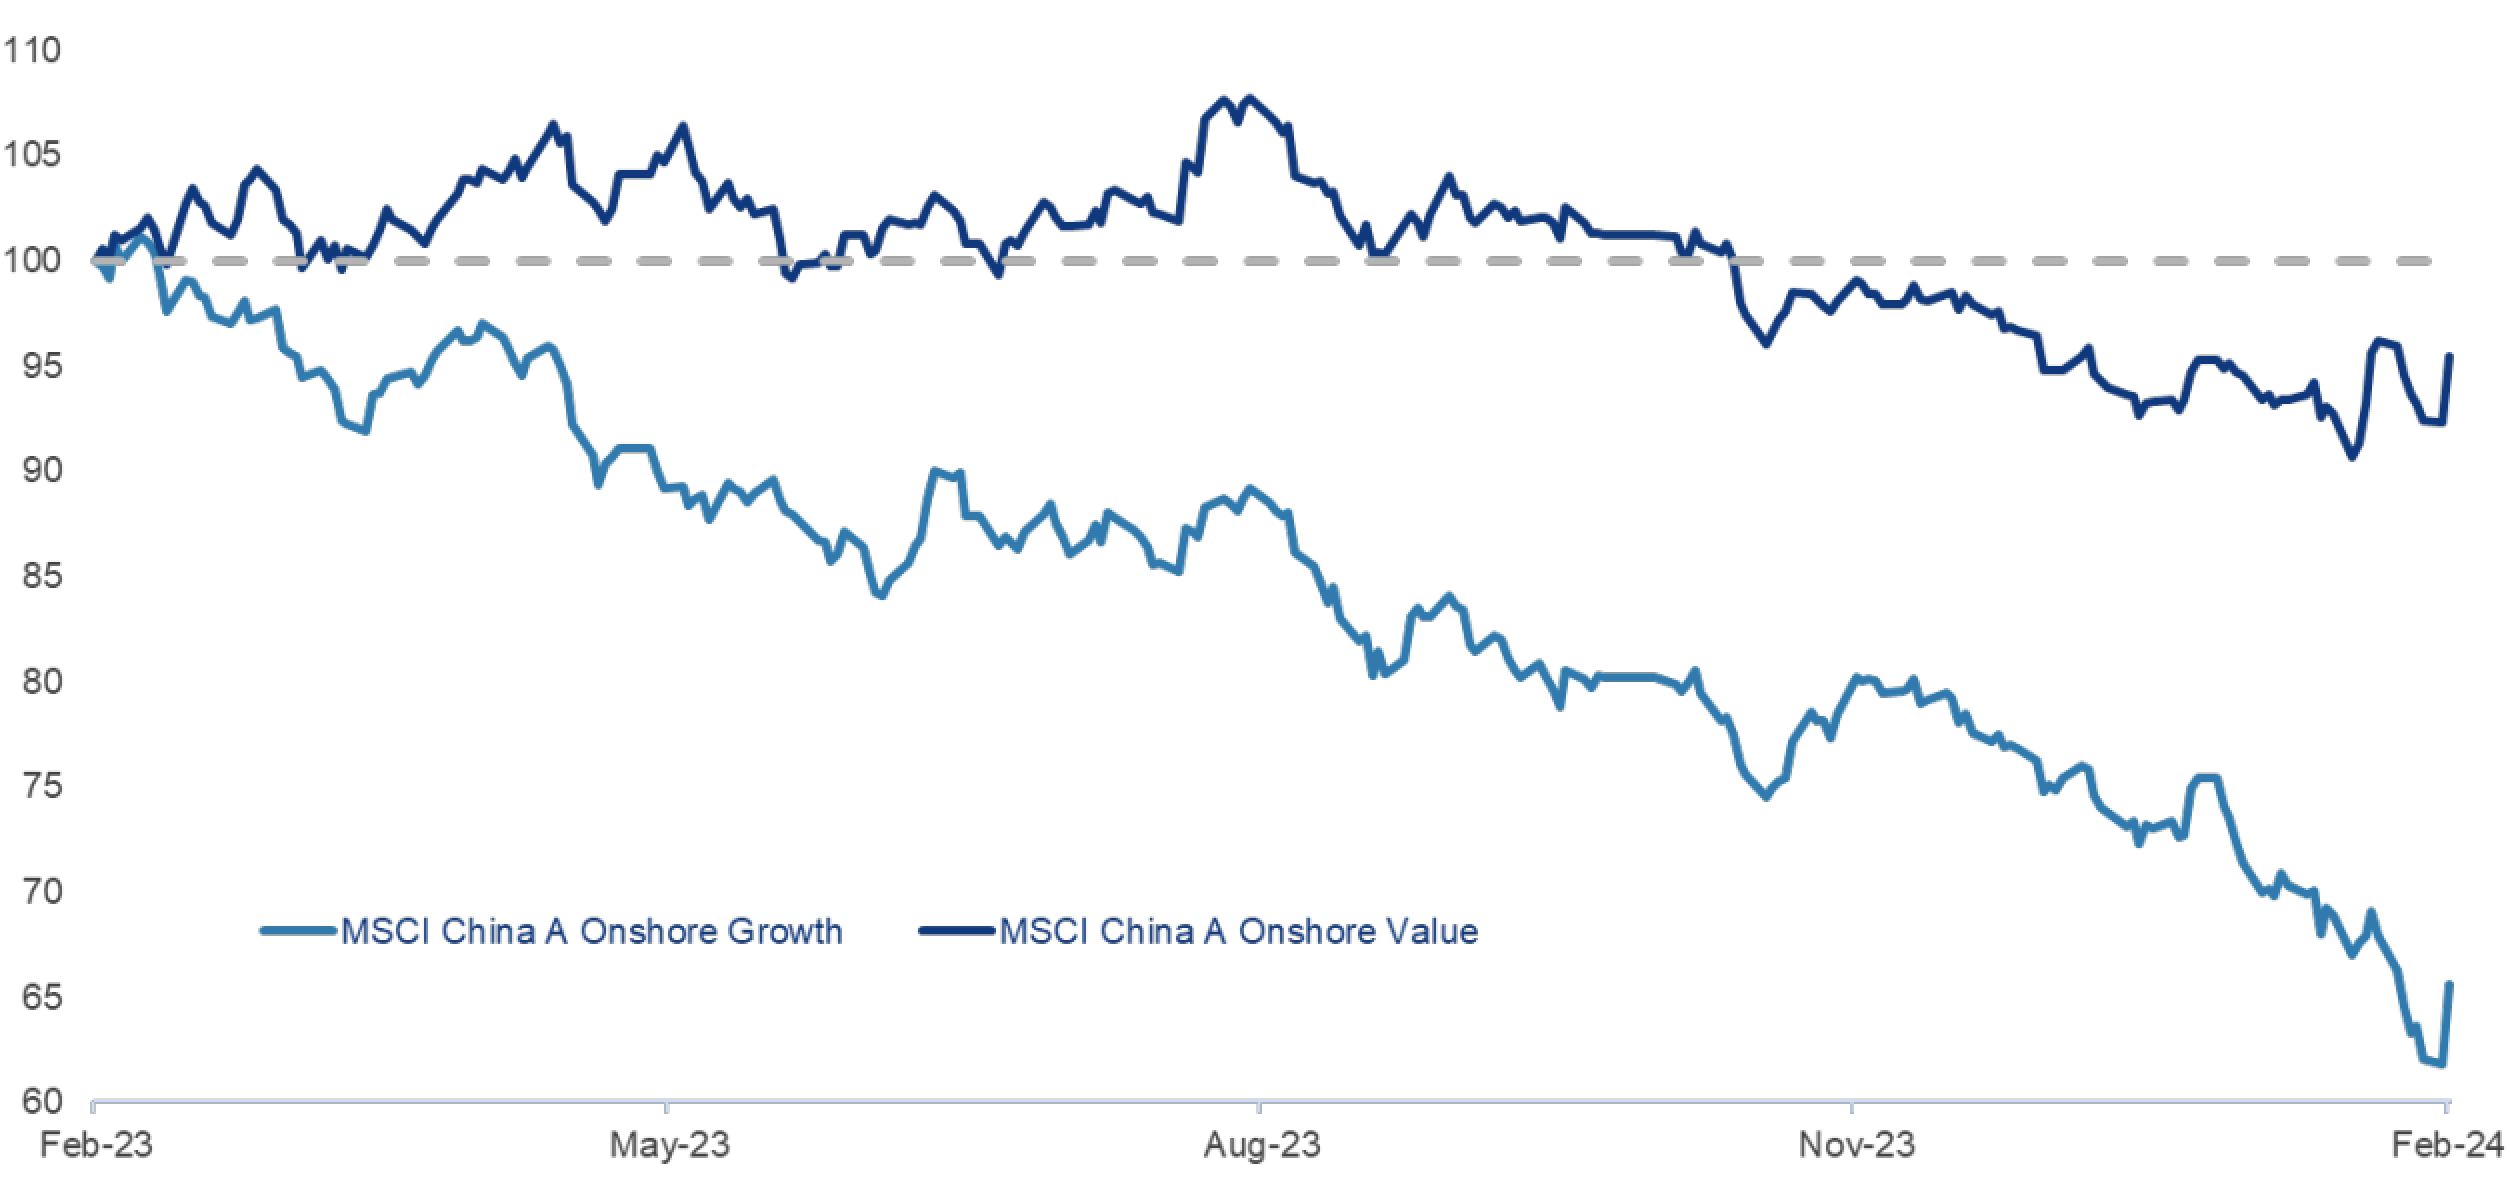 Chart 1: MSCI China A Onshore Growth vs Value, 1 Year Performance (CNY, rebased to 100)